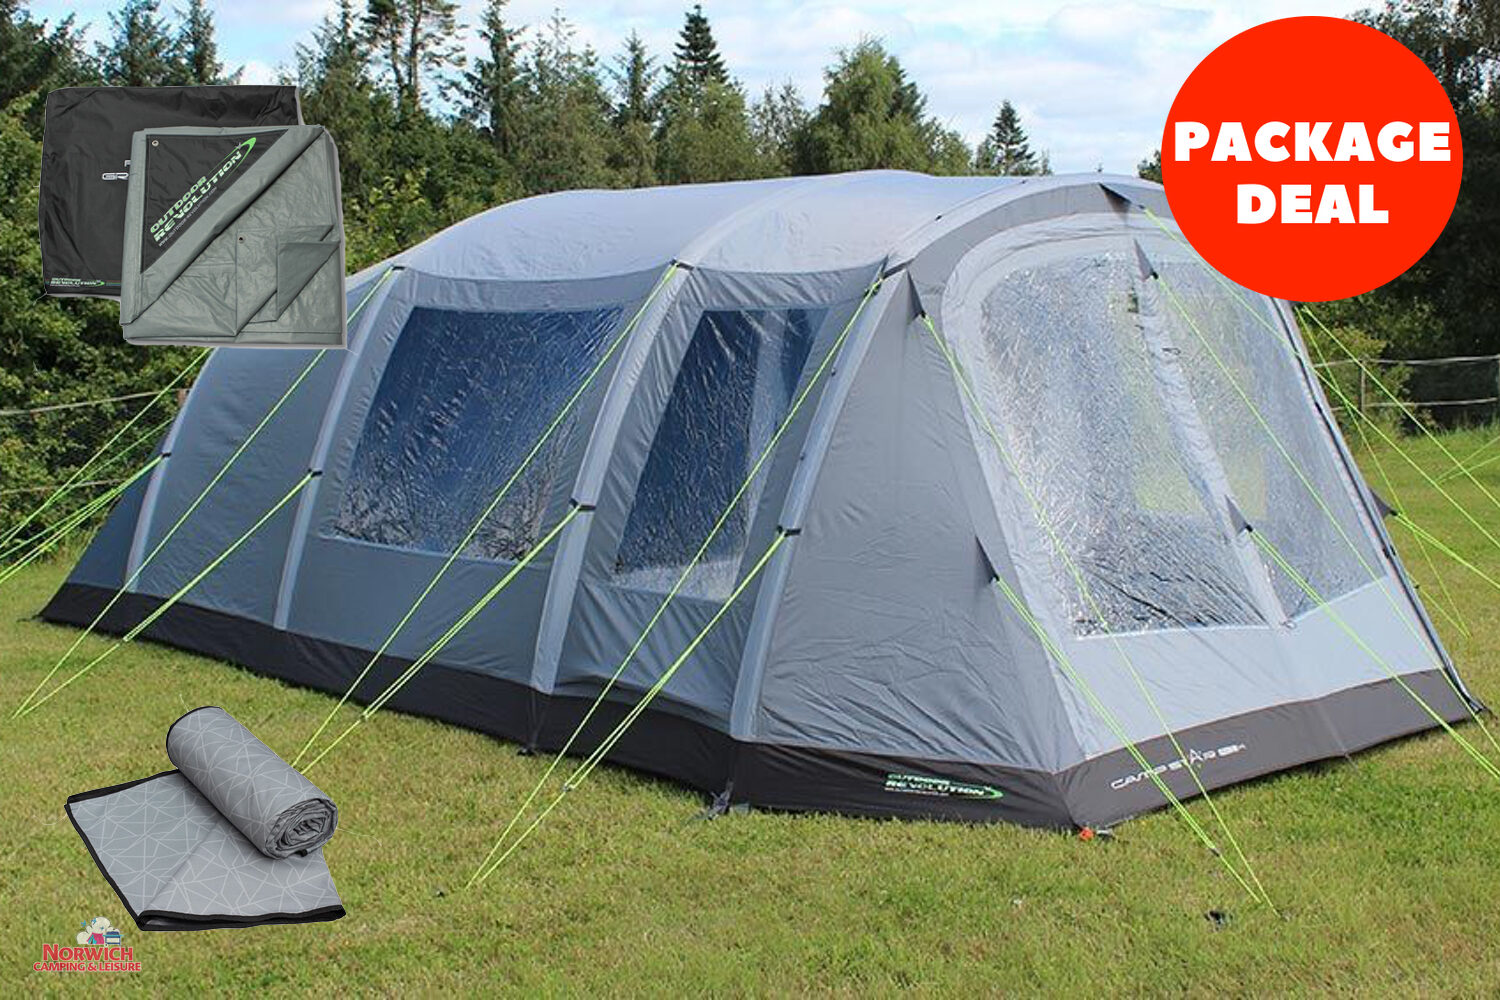 Outdoor Revolution Campstar 500 Package Deal